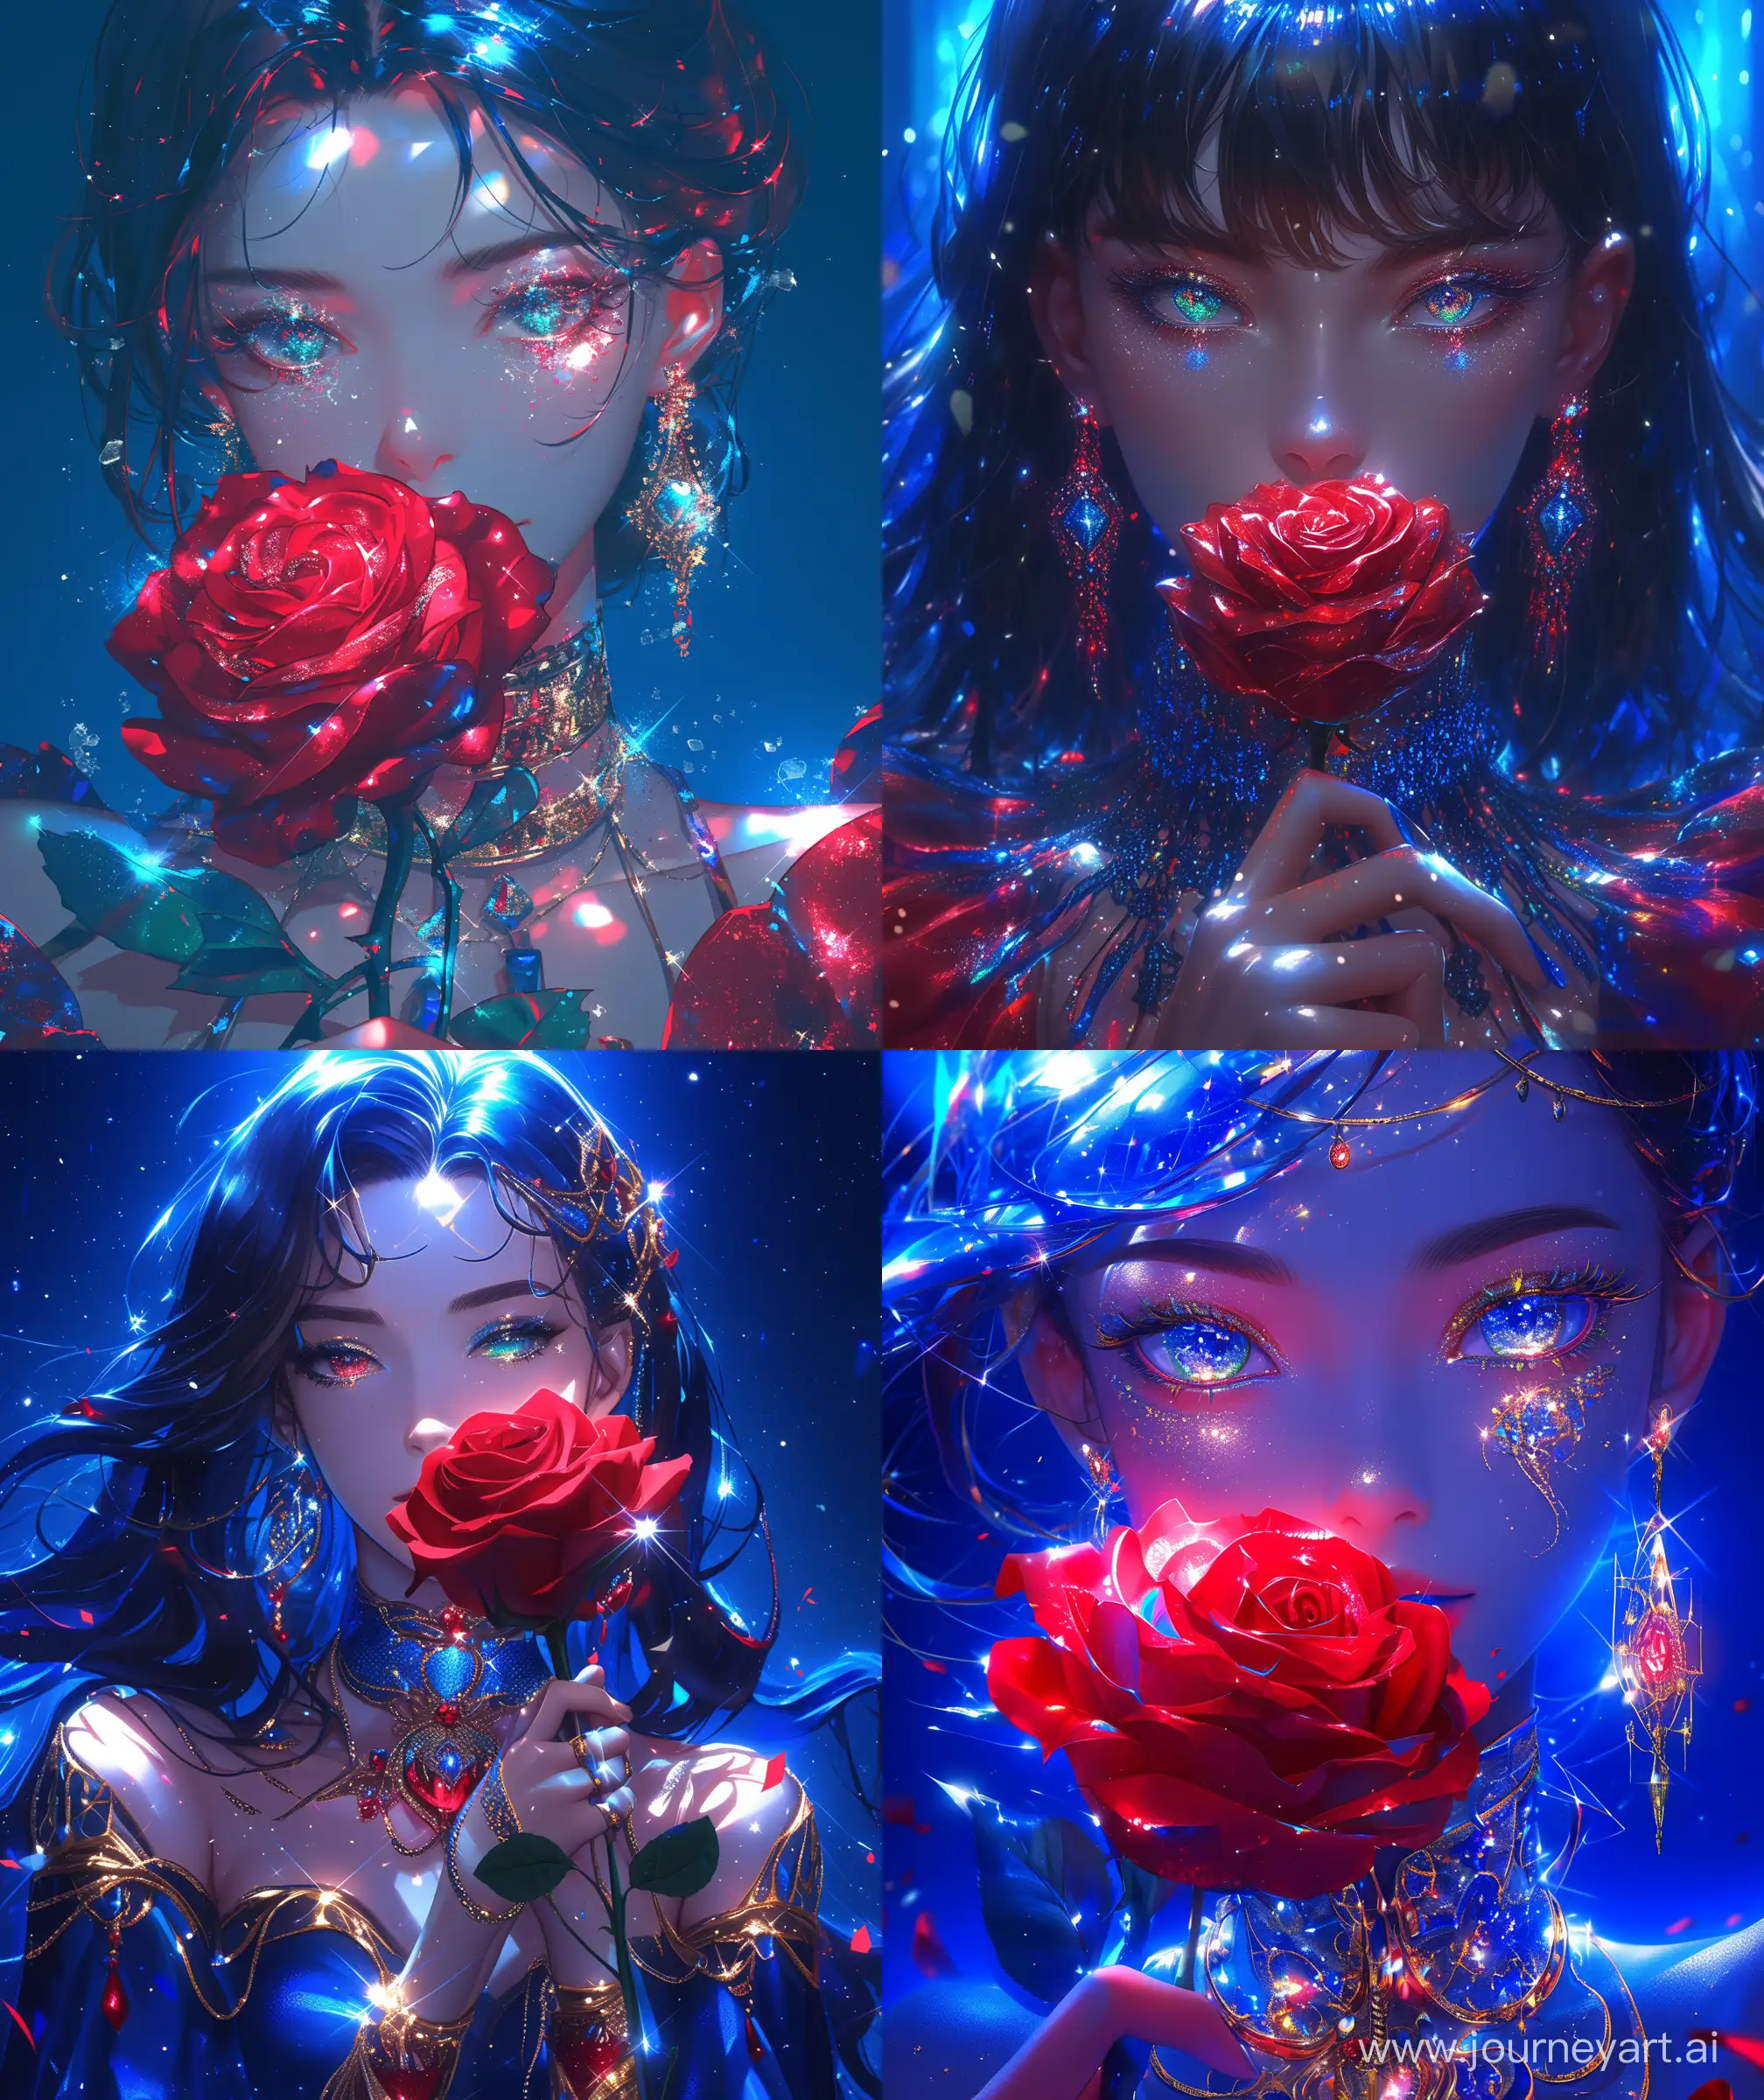 Elegant-AnimeInspired-Woman-Holding-a-Glittering-Red-Rose-in-Glossy-Blue-Ambience